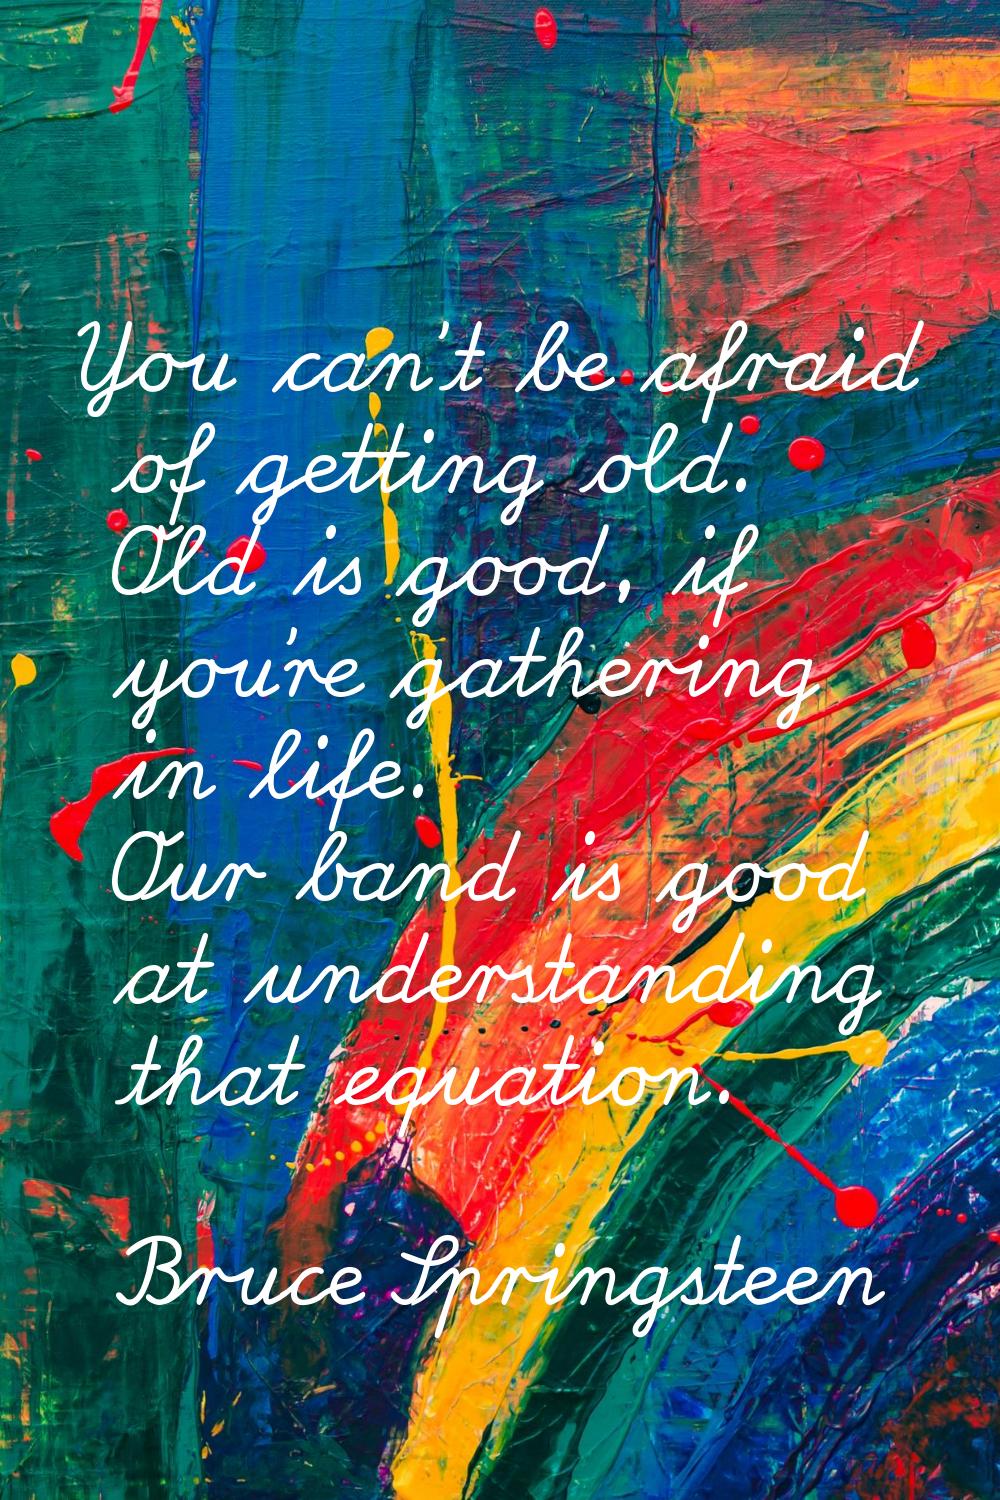 You can't be afraid of getting old. Old is good, if you're gathering in life. Our band is good at u